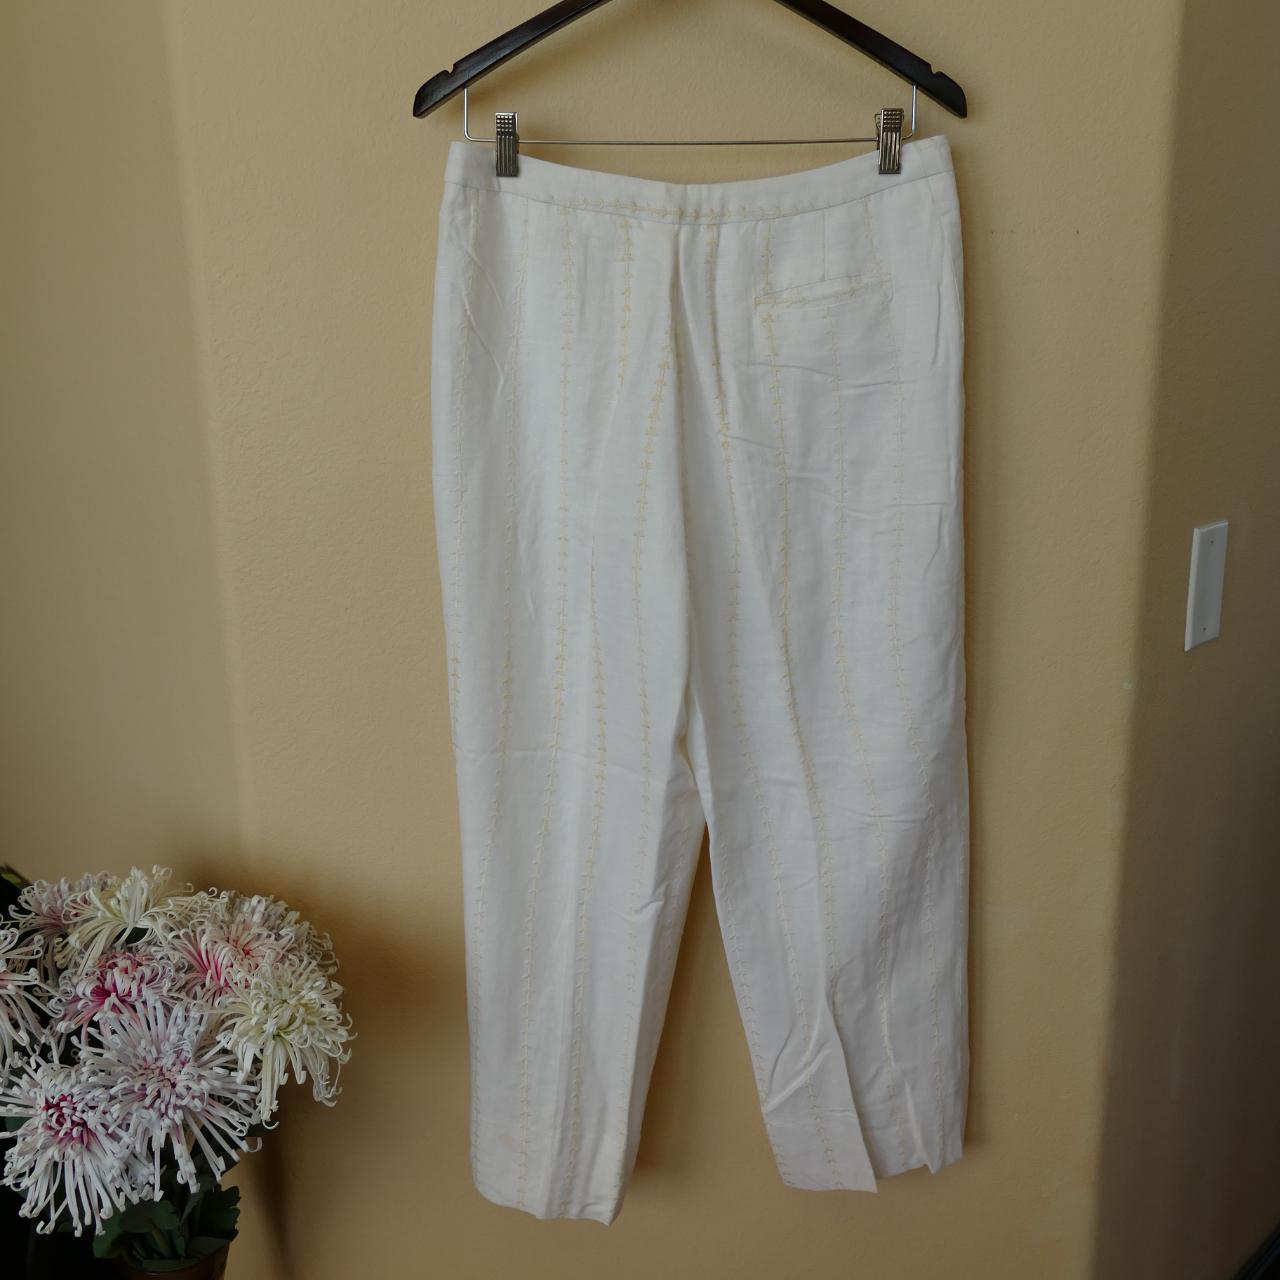 Women's White and Cream Trousers | Depop